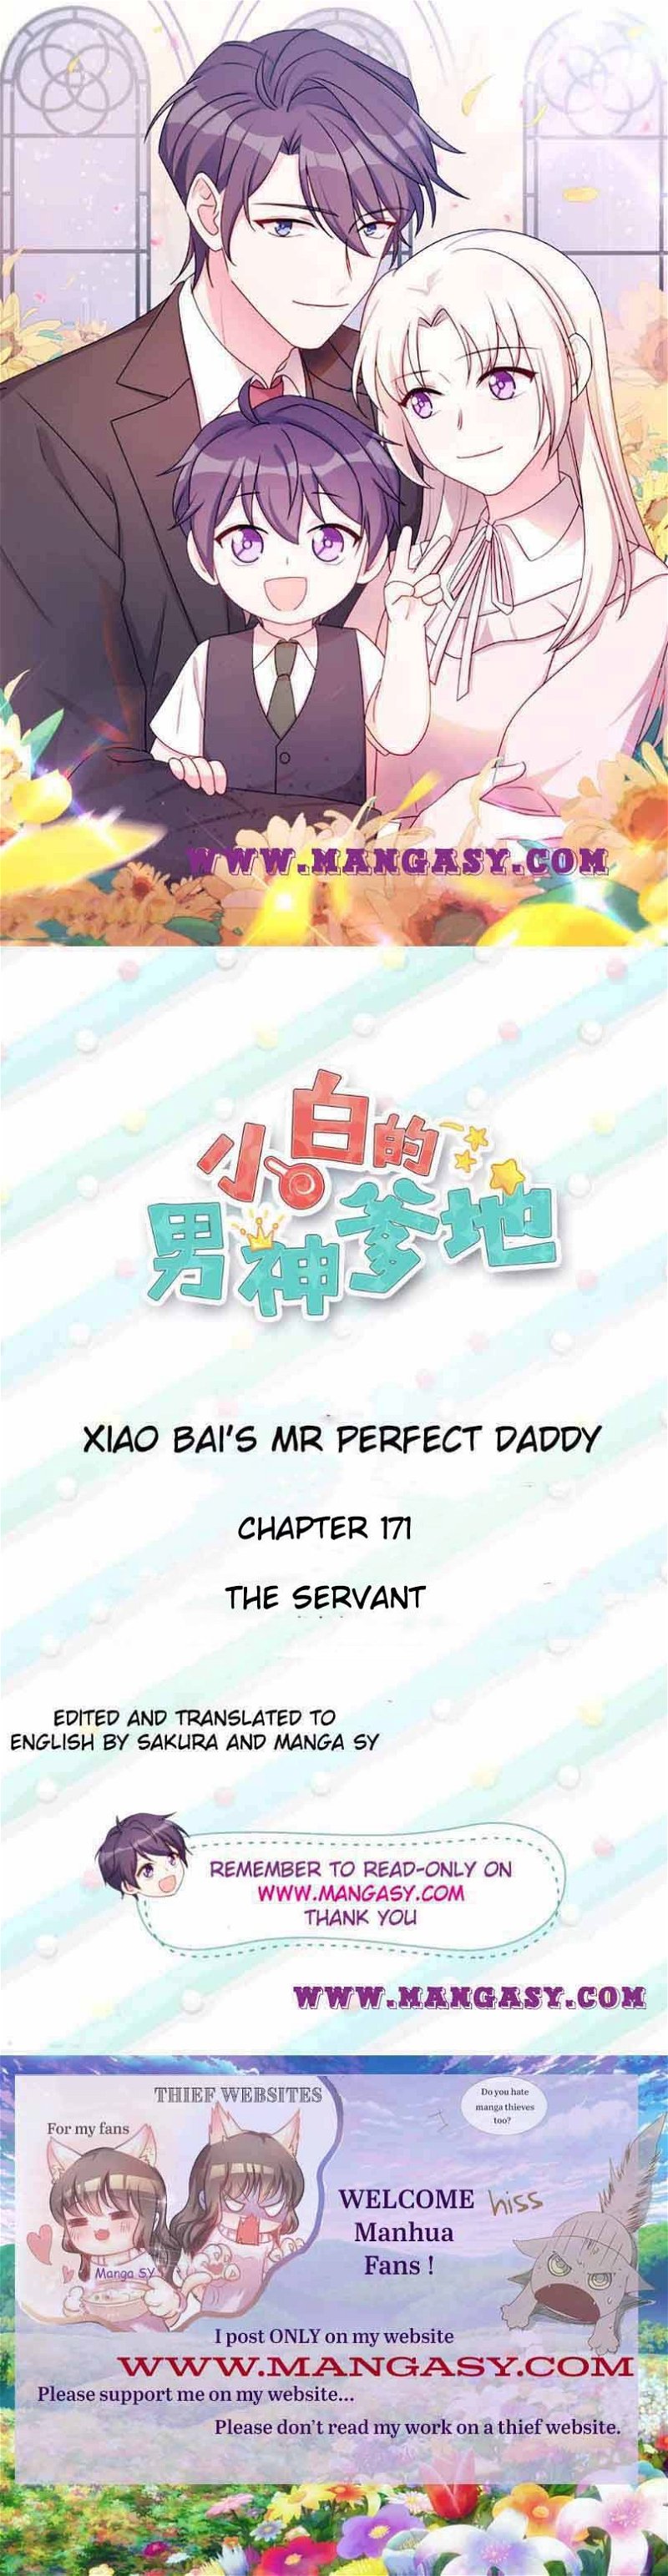 Xiao Bai’s father is a wonderful person Chapter 171 - Page 0